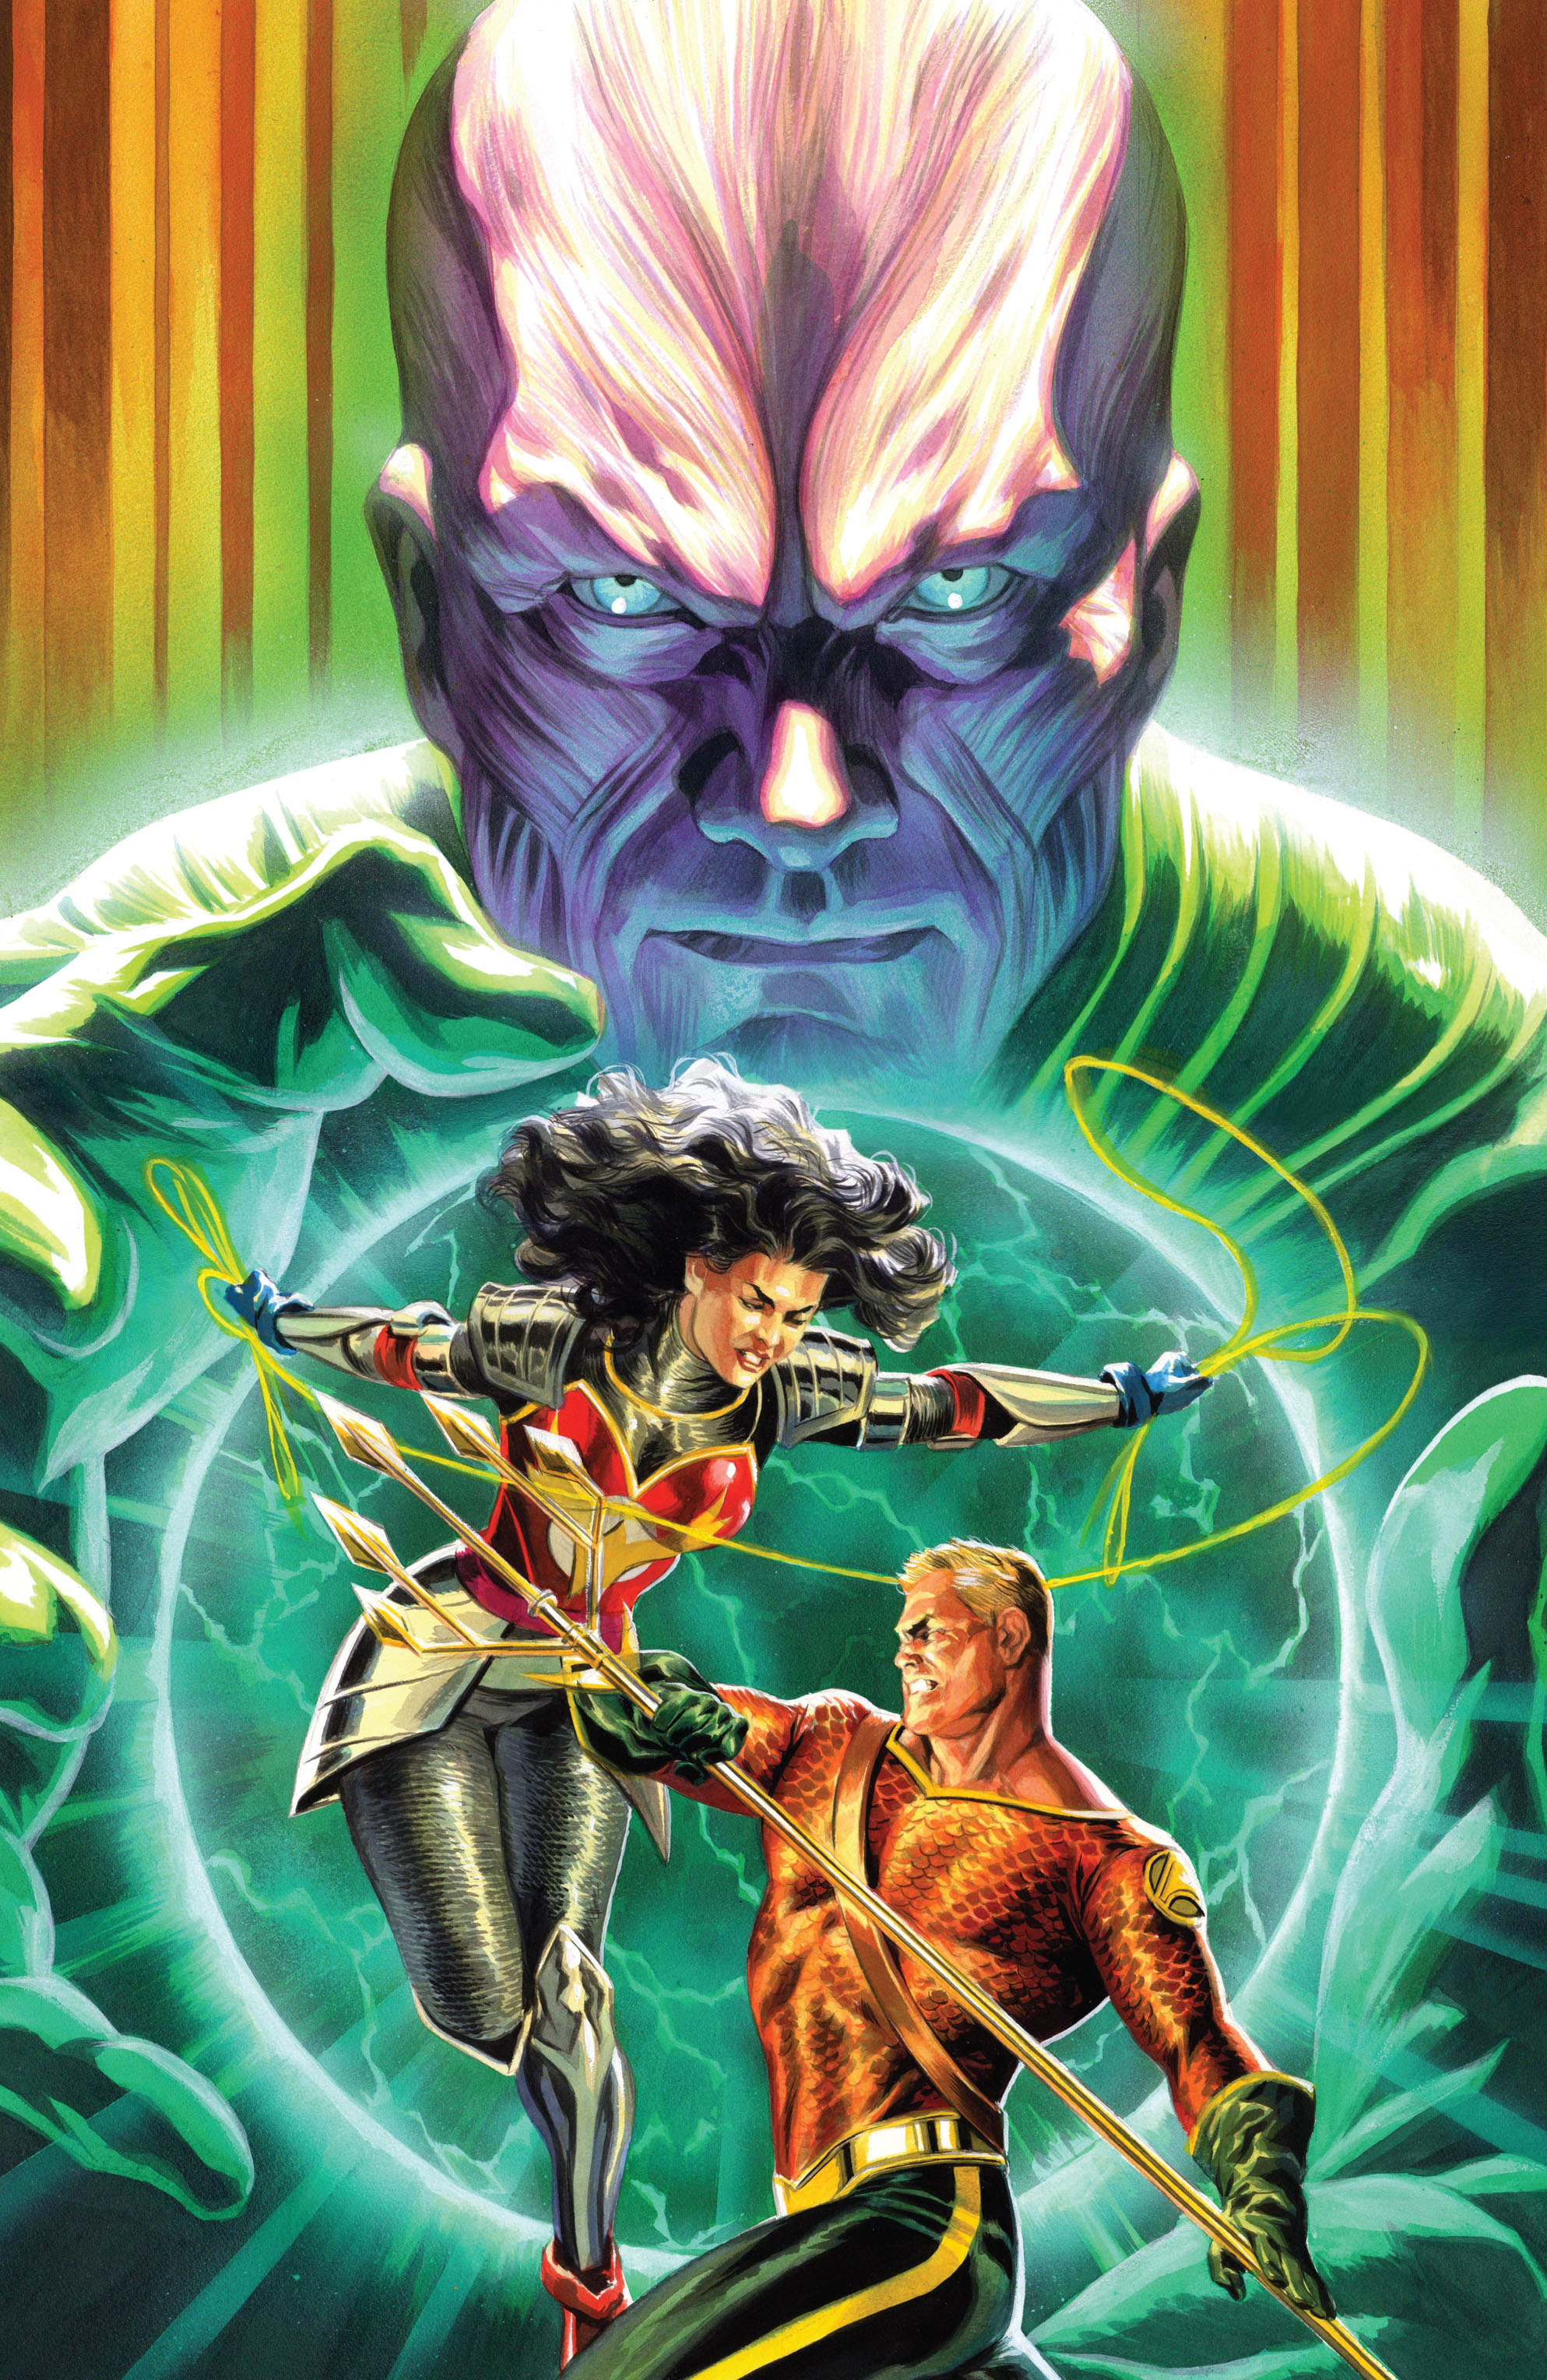 Flashpoint: The World of Flashpoint Featuring Green Lantern Full #1 - English 44